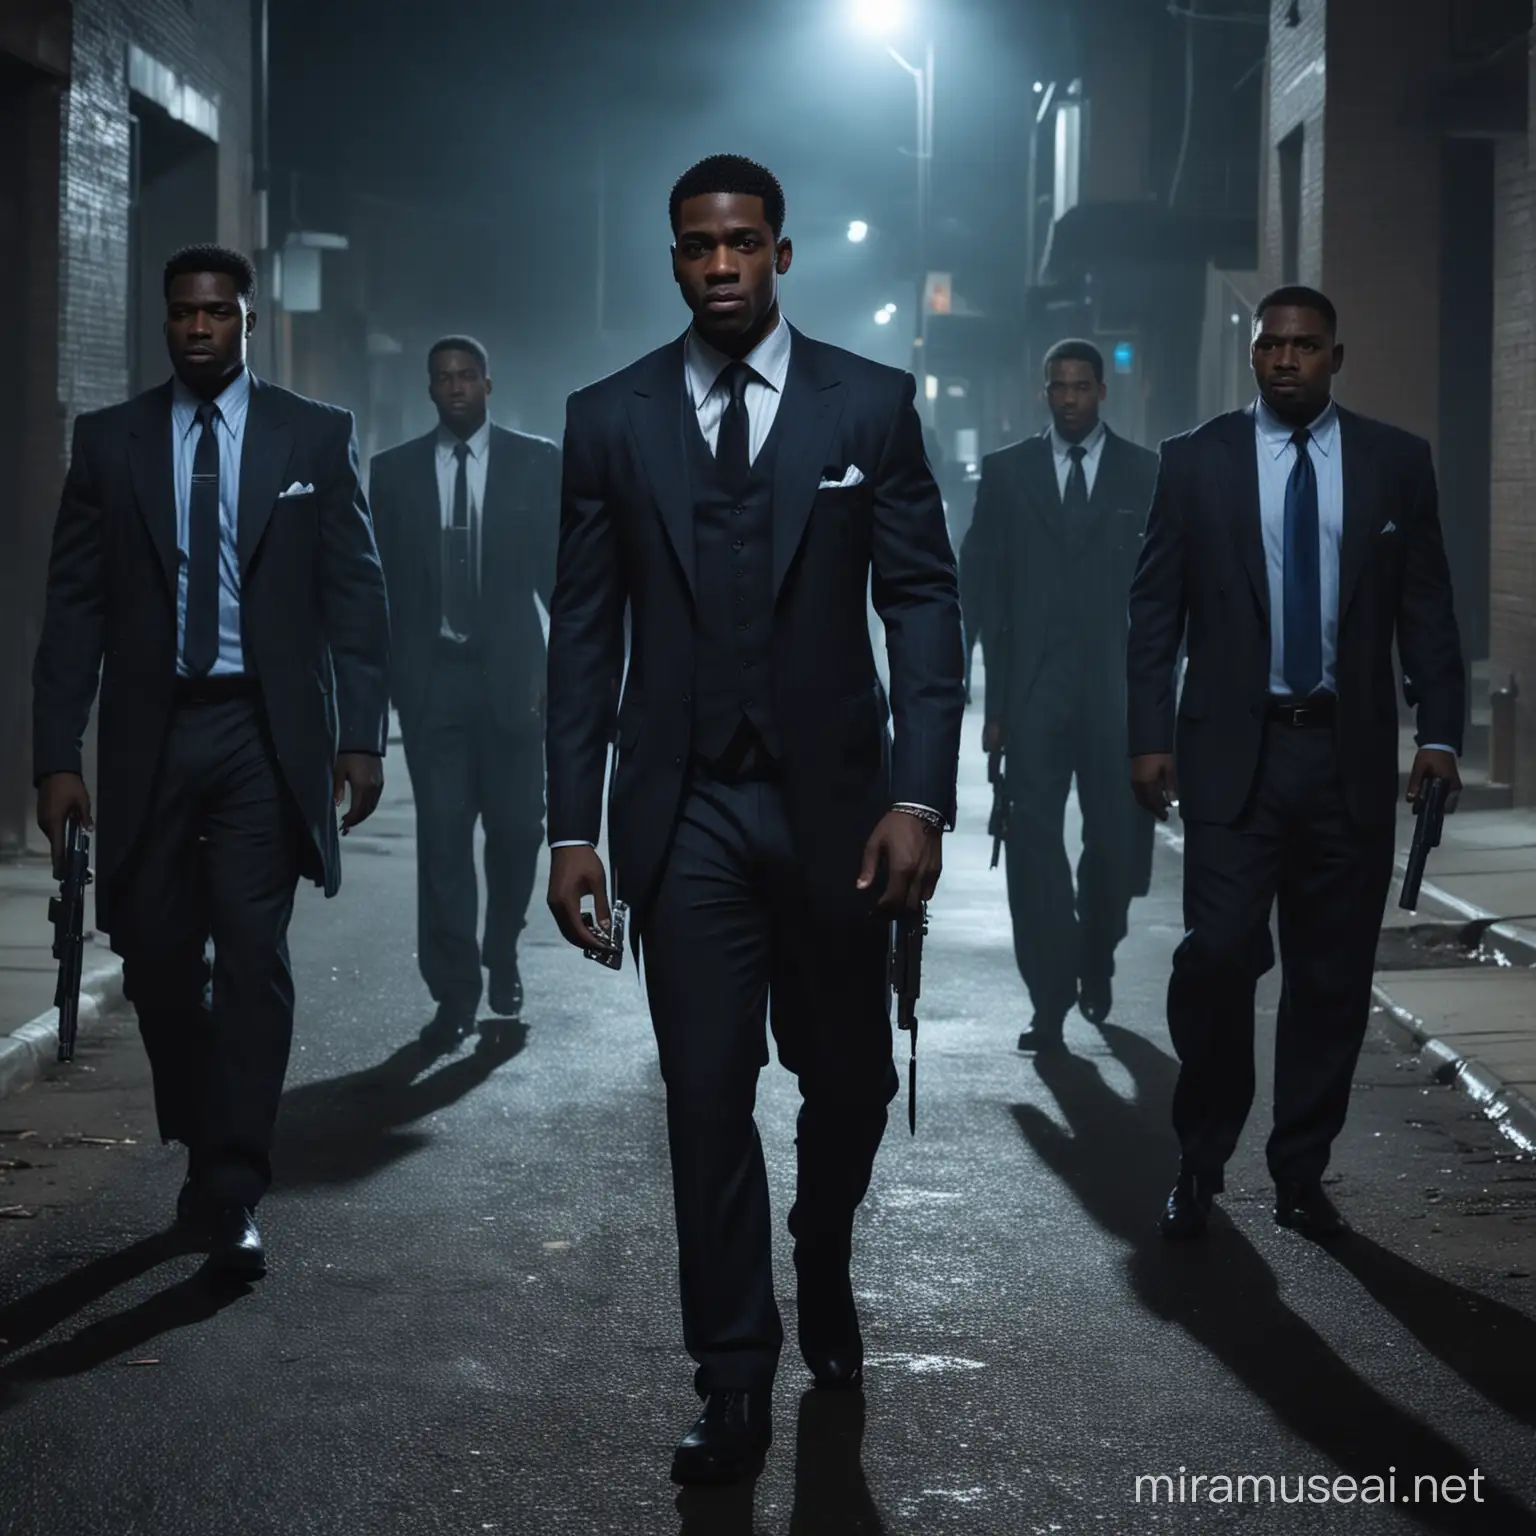 A bulked shredded black man dressed in a suit, he walks confidently along a cold dark street, 2 black american gangsters walk beside him carrying pistols the 2 gangstes are not dressed in suits but in gangster  style, blue shining objects lay on the ground as they take their walk, the image is taken at midnight with only moonlight shining over the scene 